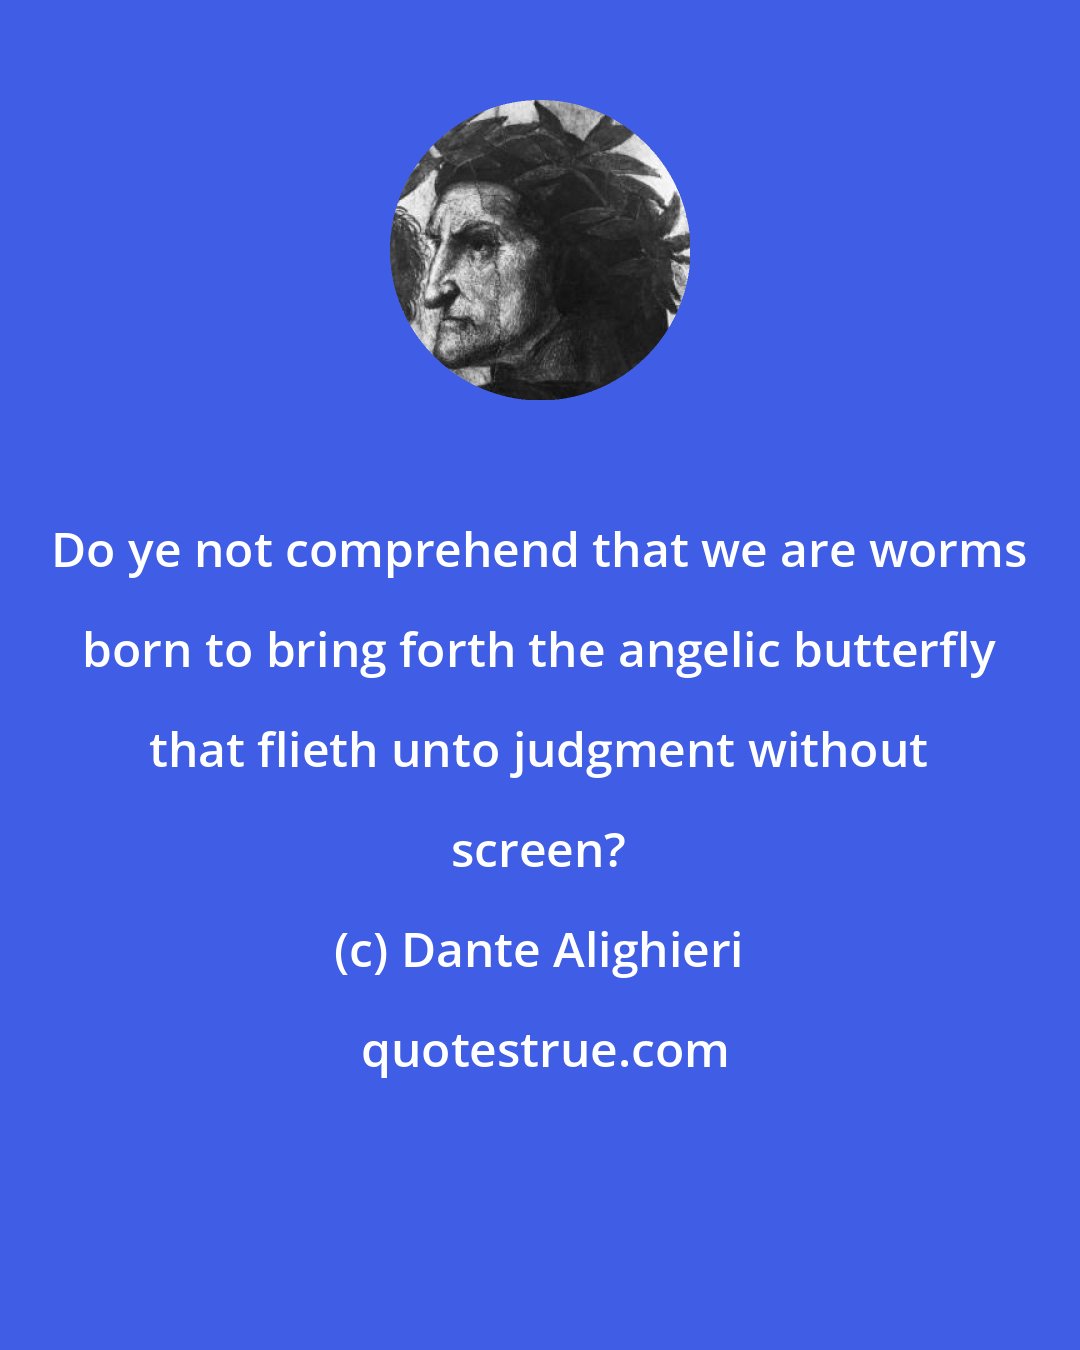 Dante Alighieri: Do ye not comprehend that we are worms born to bring forth the angelic butterfly that flieth unto judgment without screen?